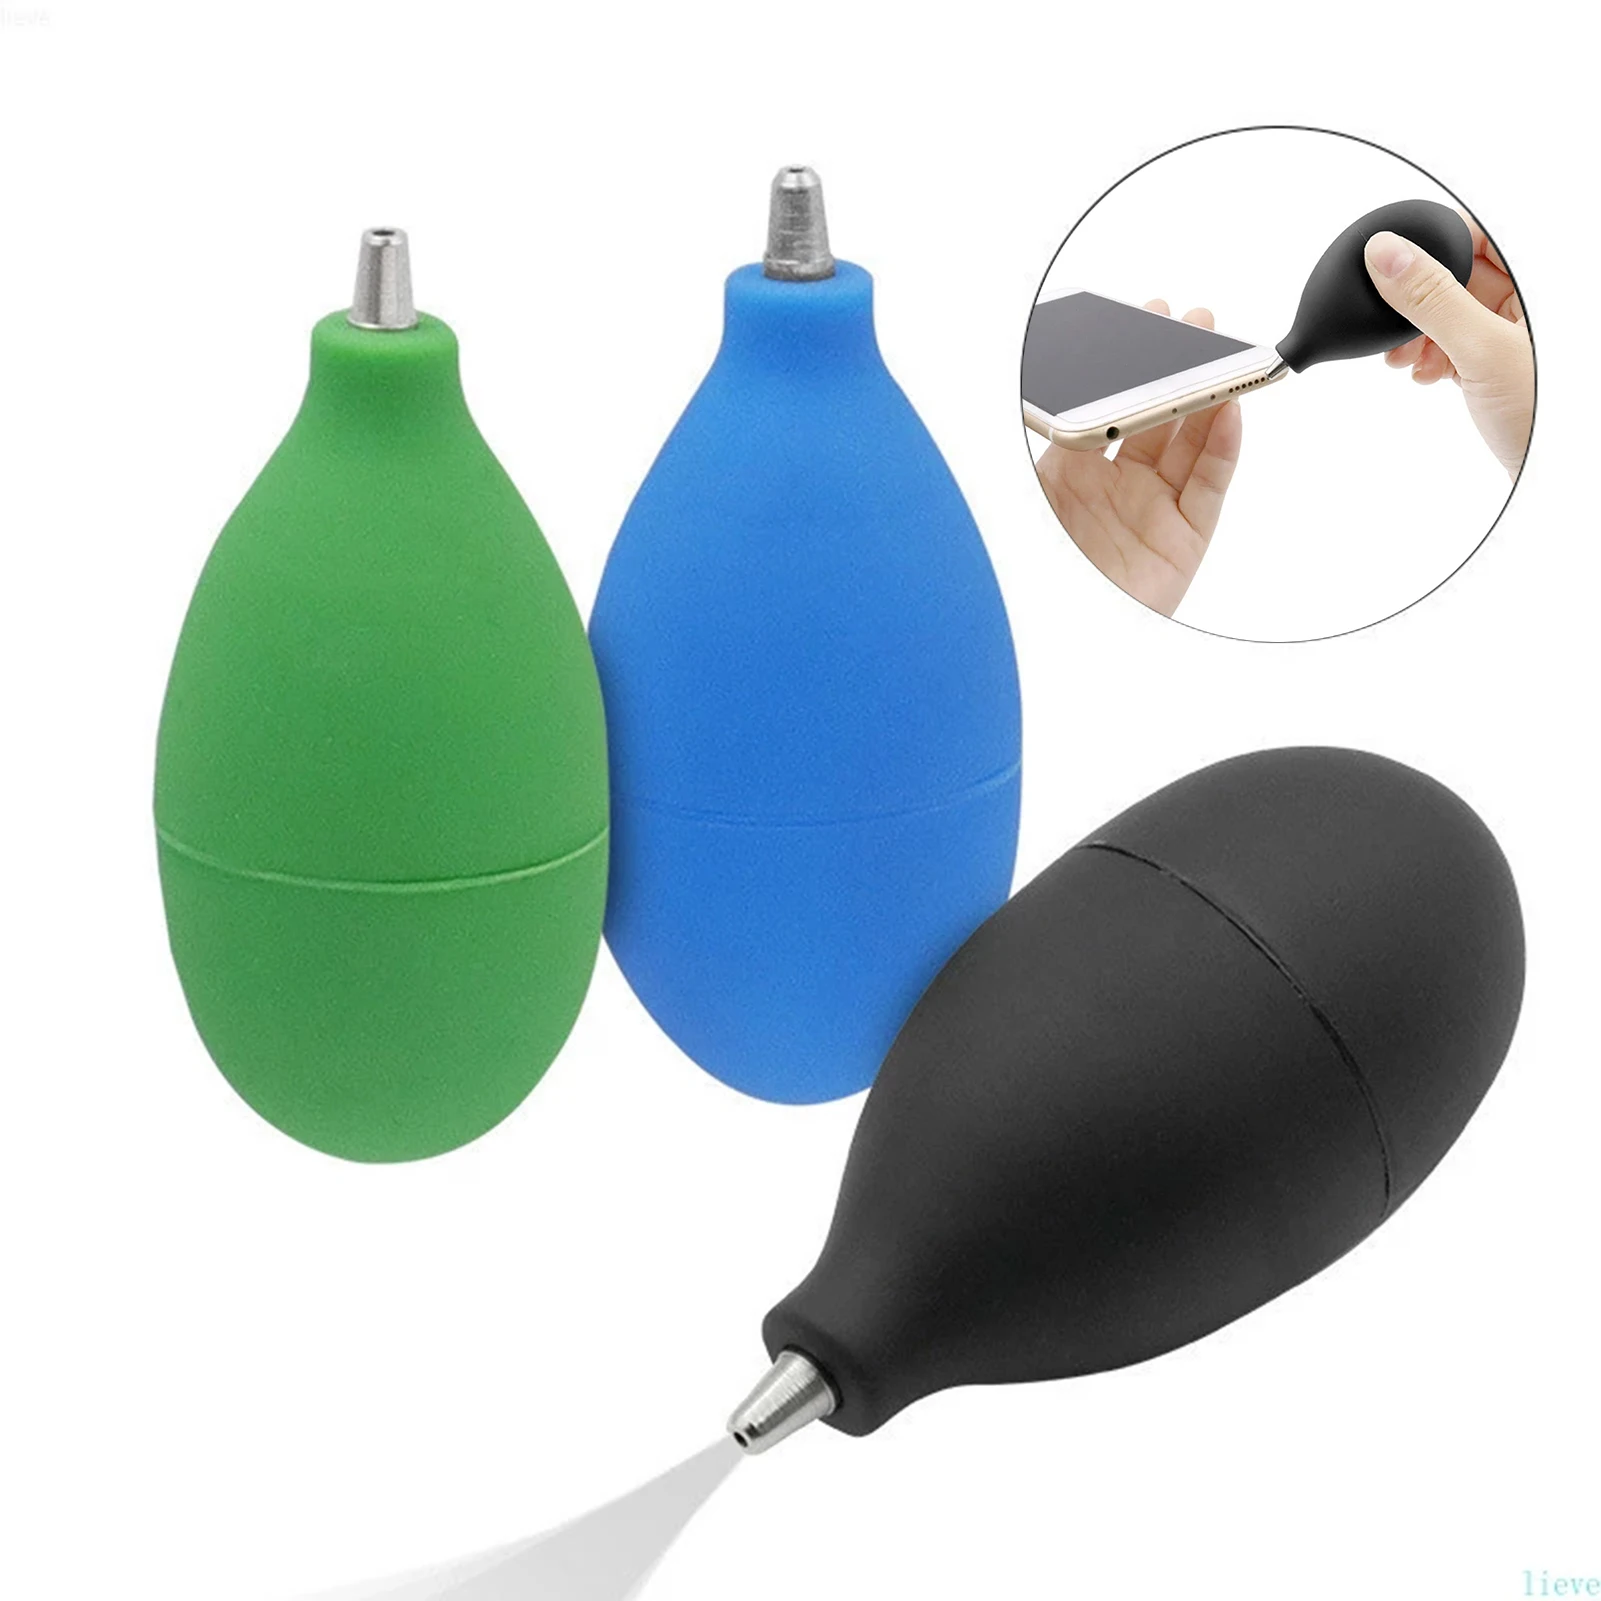 

Dust Blower Mini Handheld Super Strong Dust Blowing Air Blaster Pump Air Duster Remover For Camera Lens Laptop PC Keyboard